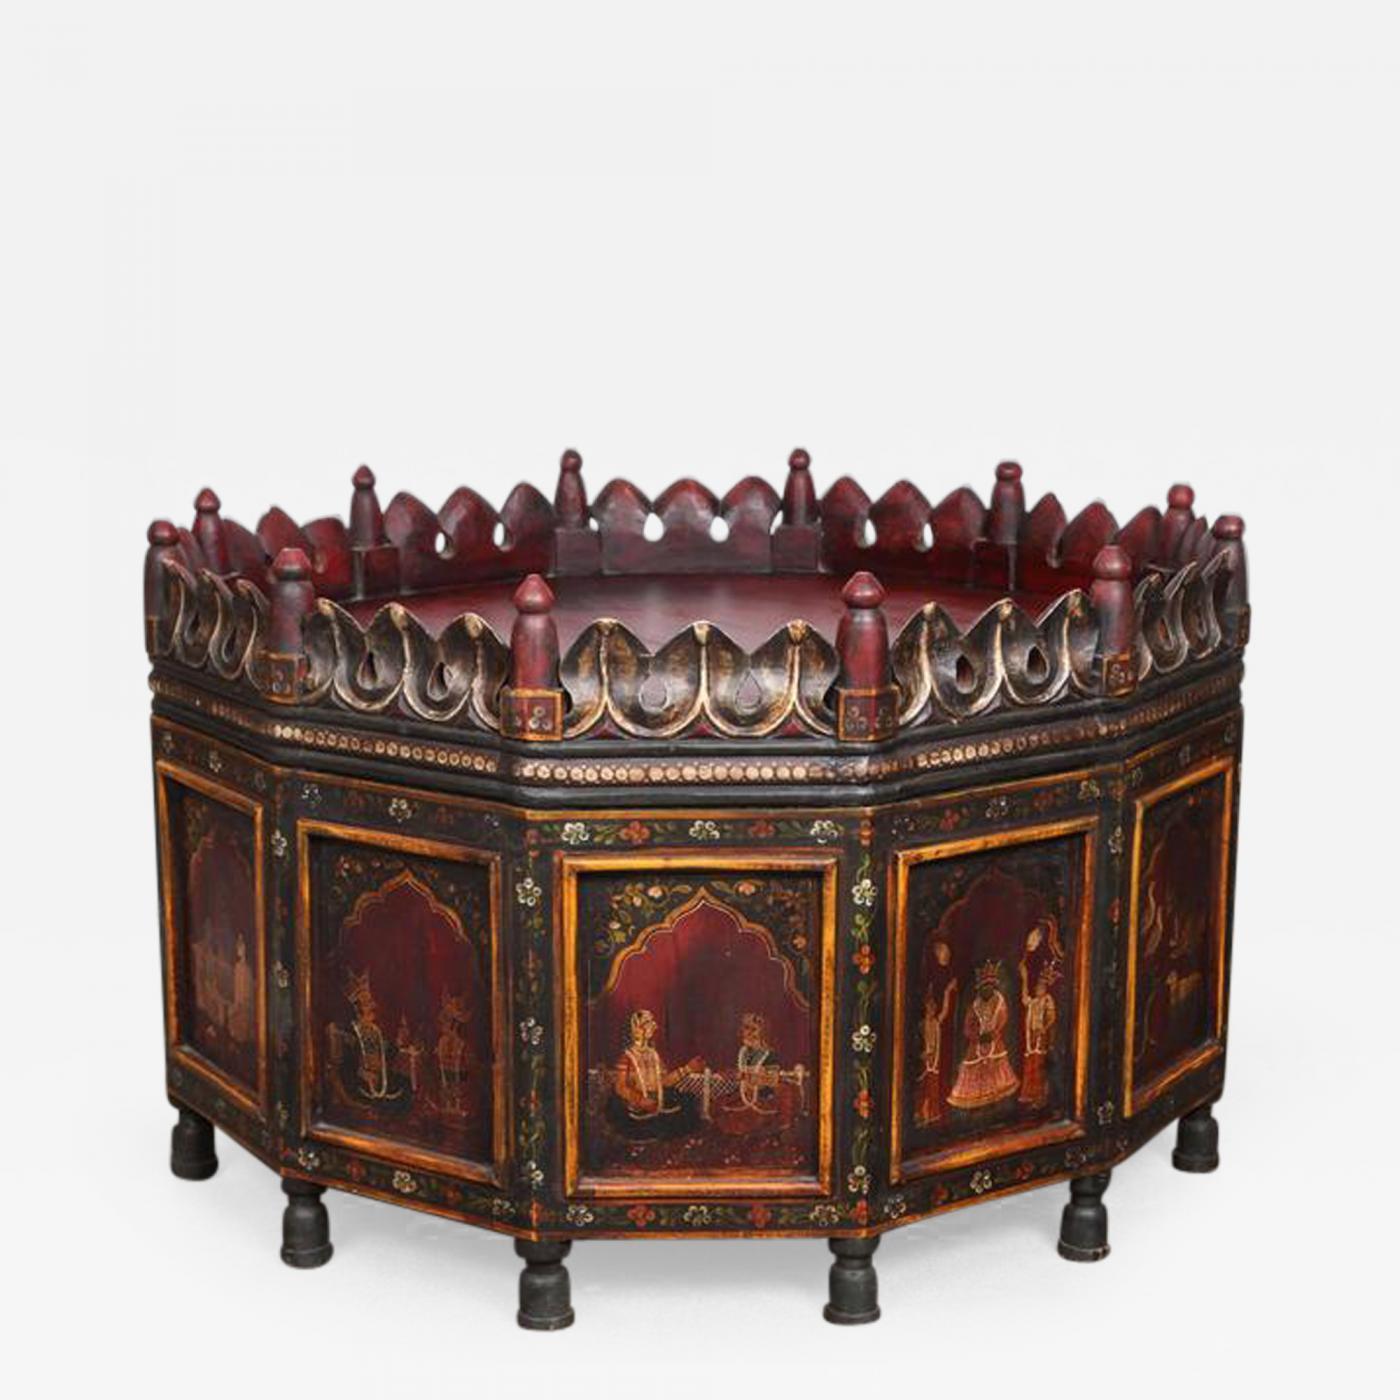 Exquisite rare Anglo Raj Indian hand-painted teak coffee table.
Top is red wine color, dark green and yellow tones.
Solid top with a leaf gallery and turned finials.
Gorgeous coffee table with decorated panels depicting stories scenes of Indian